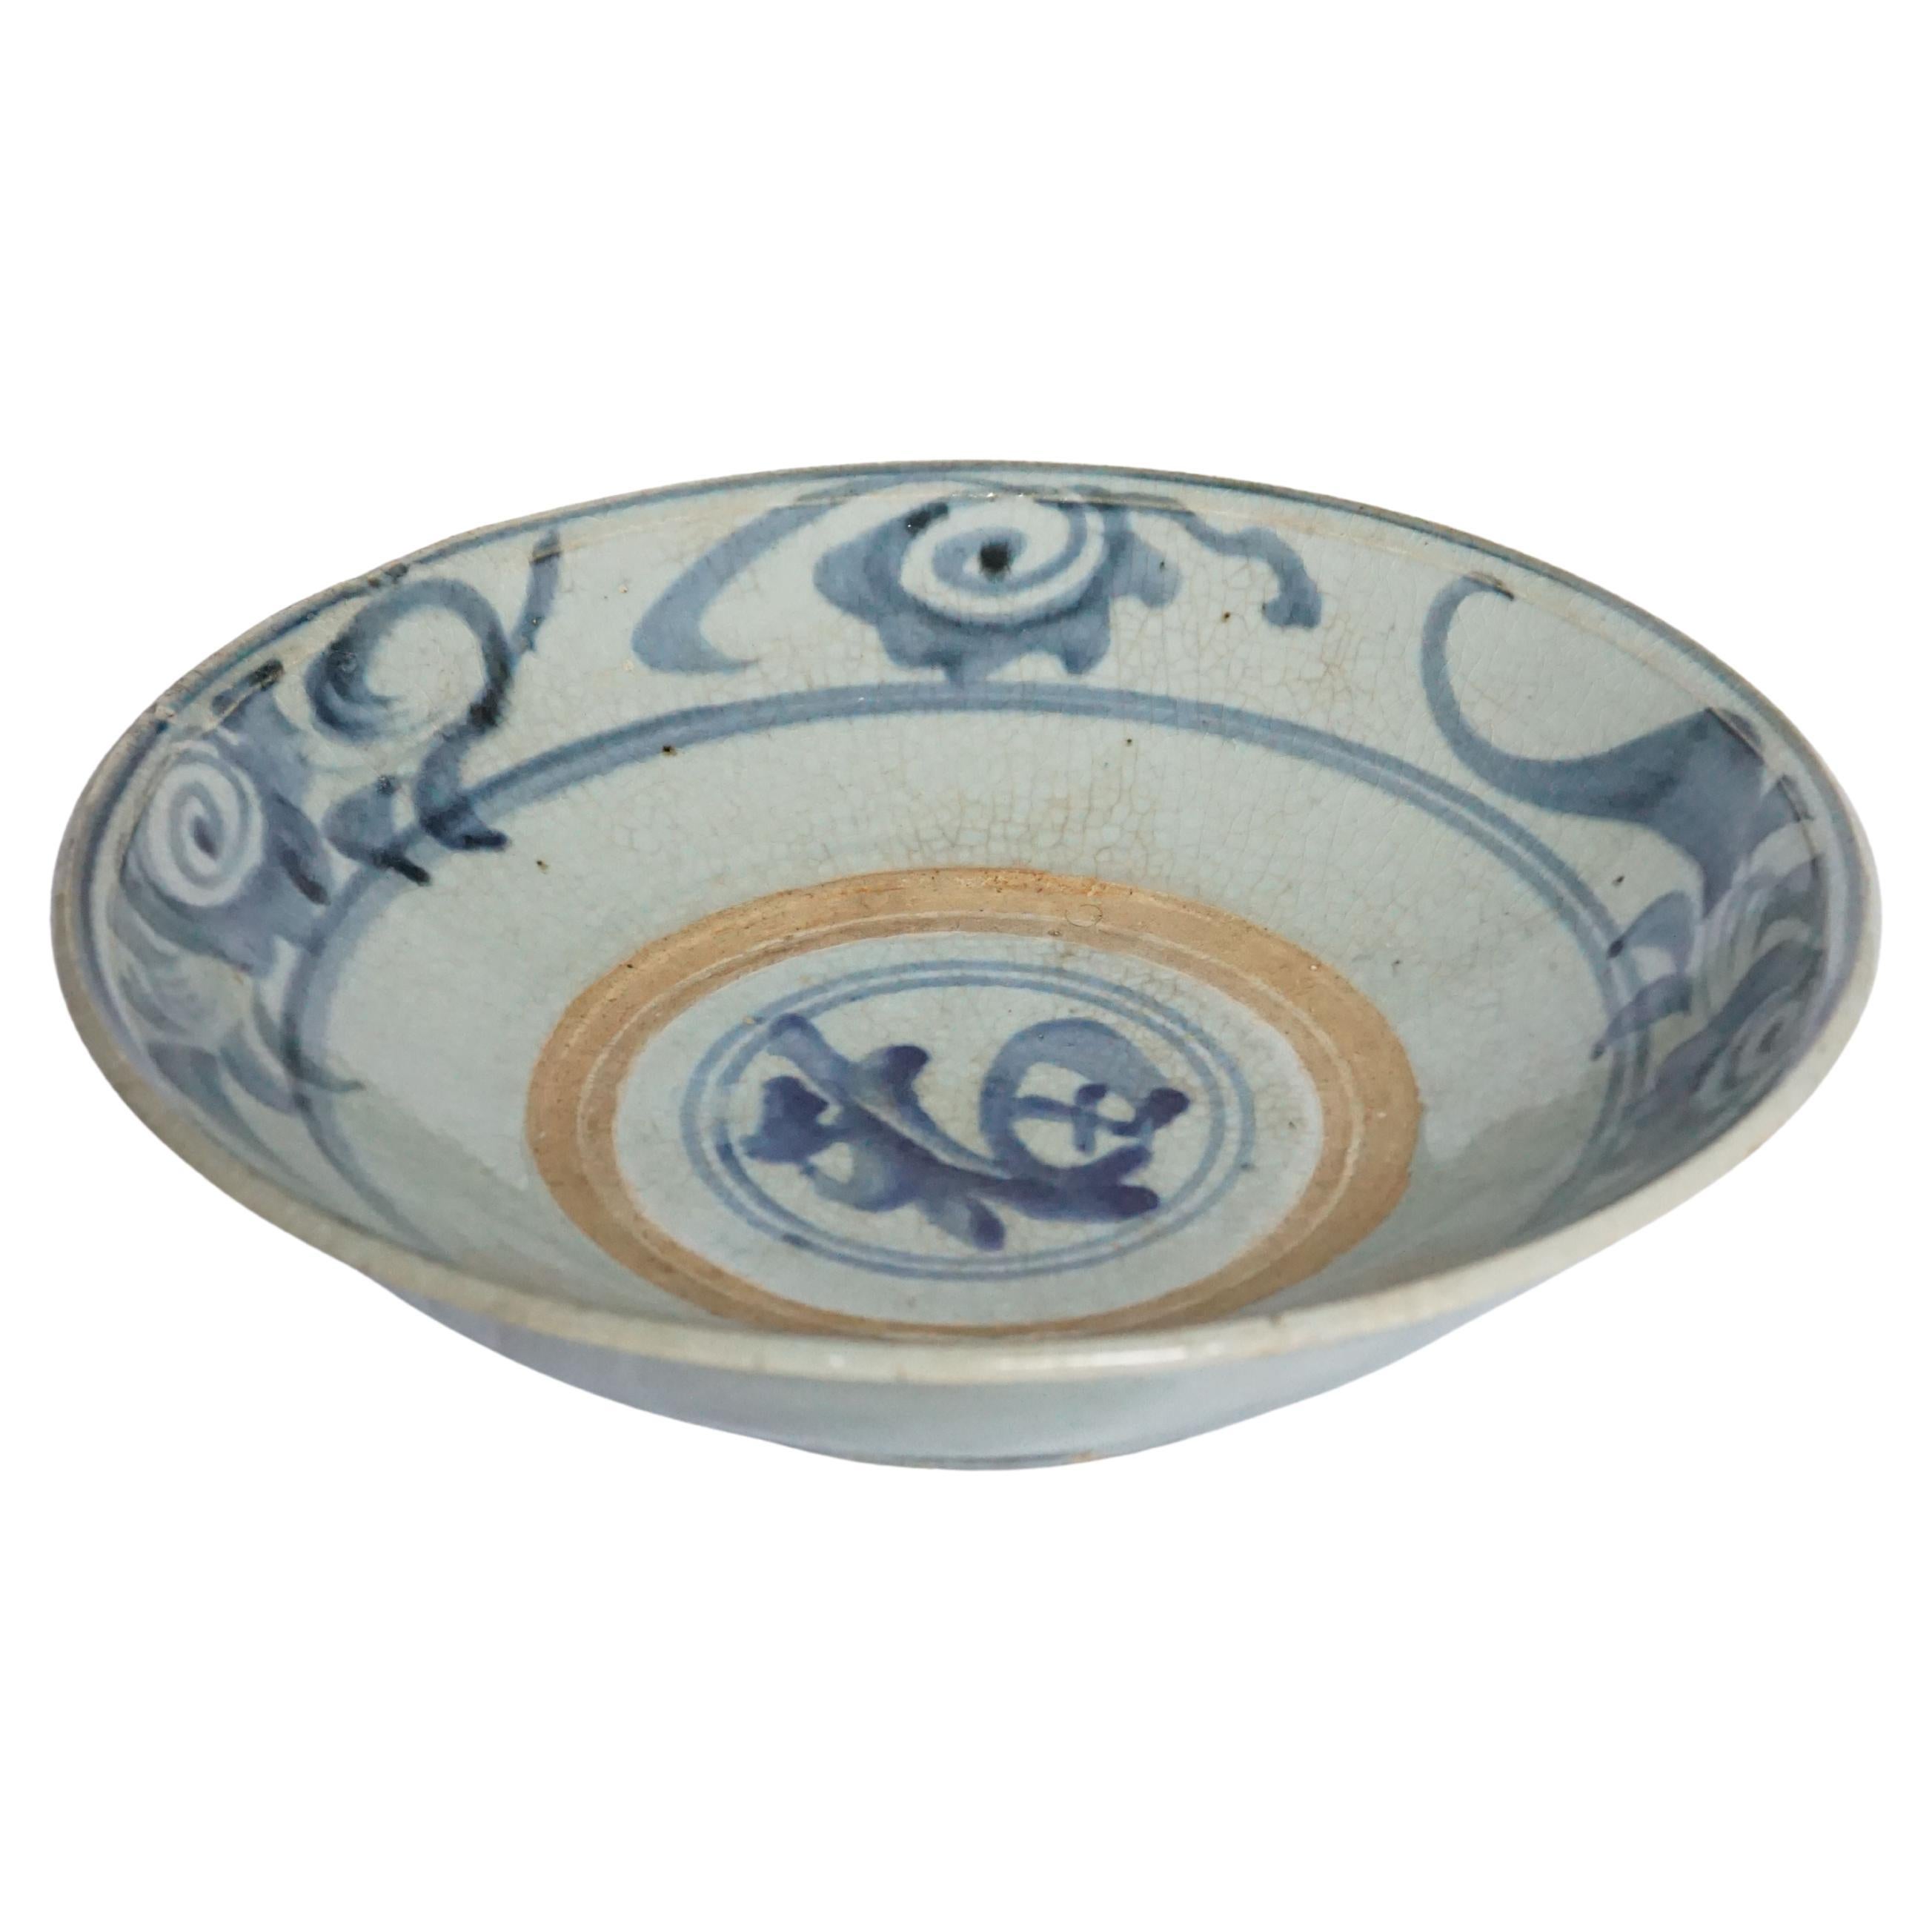 Chinese Blue & White Porcelain Plate with Hand-Painted Strokes, Qing Dynasty 